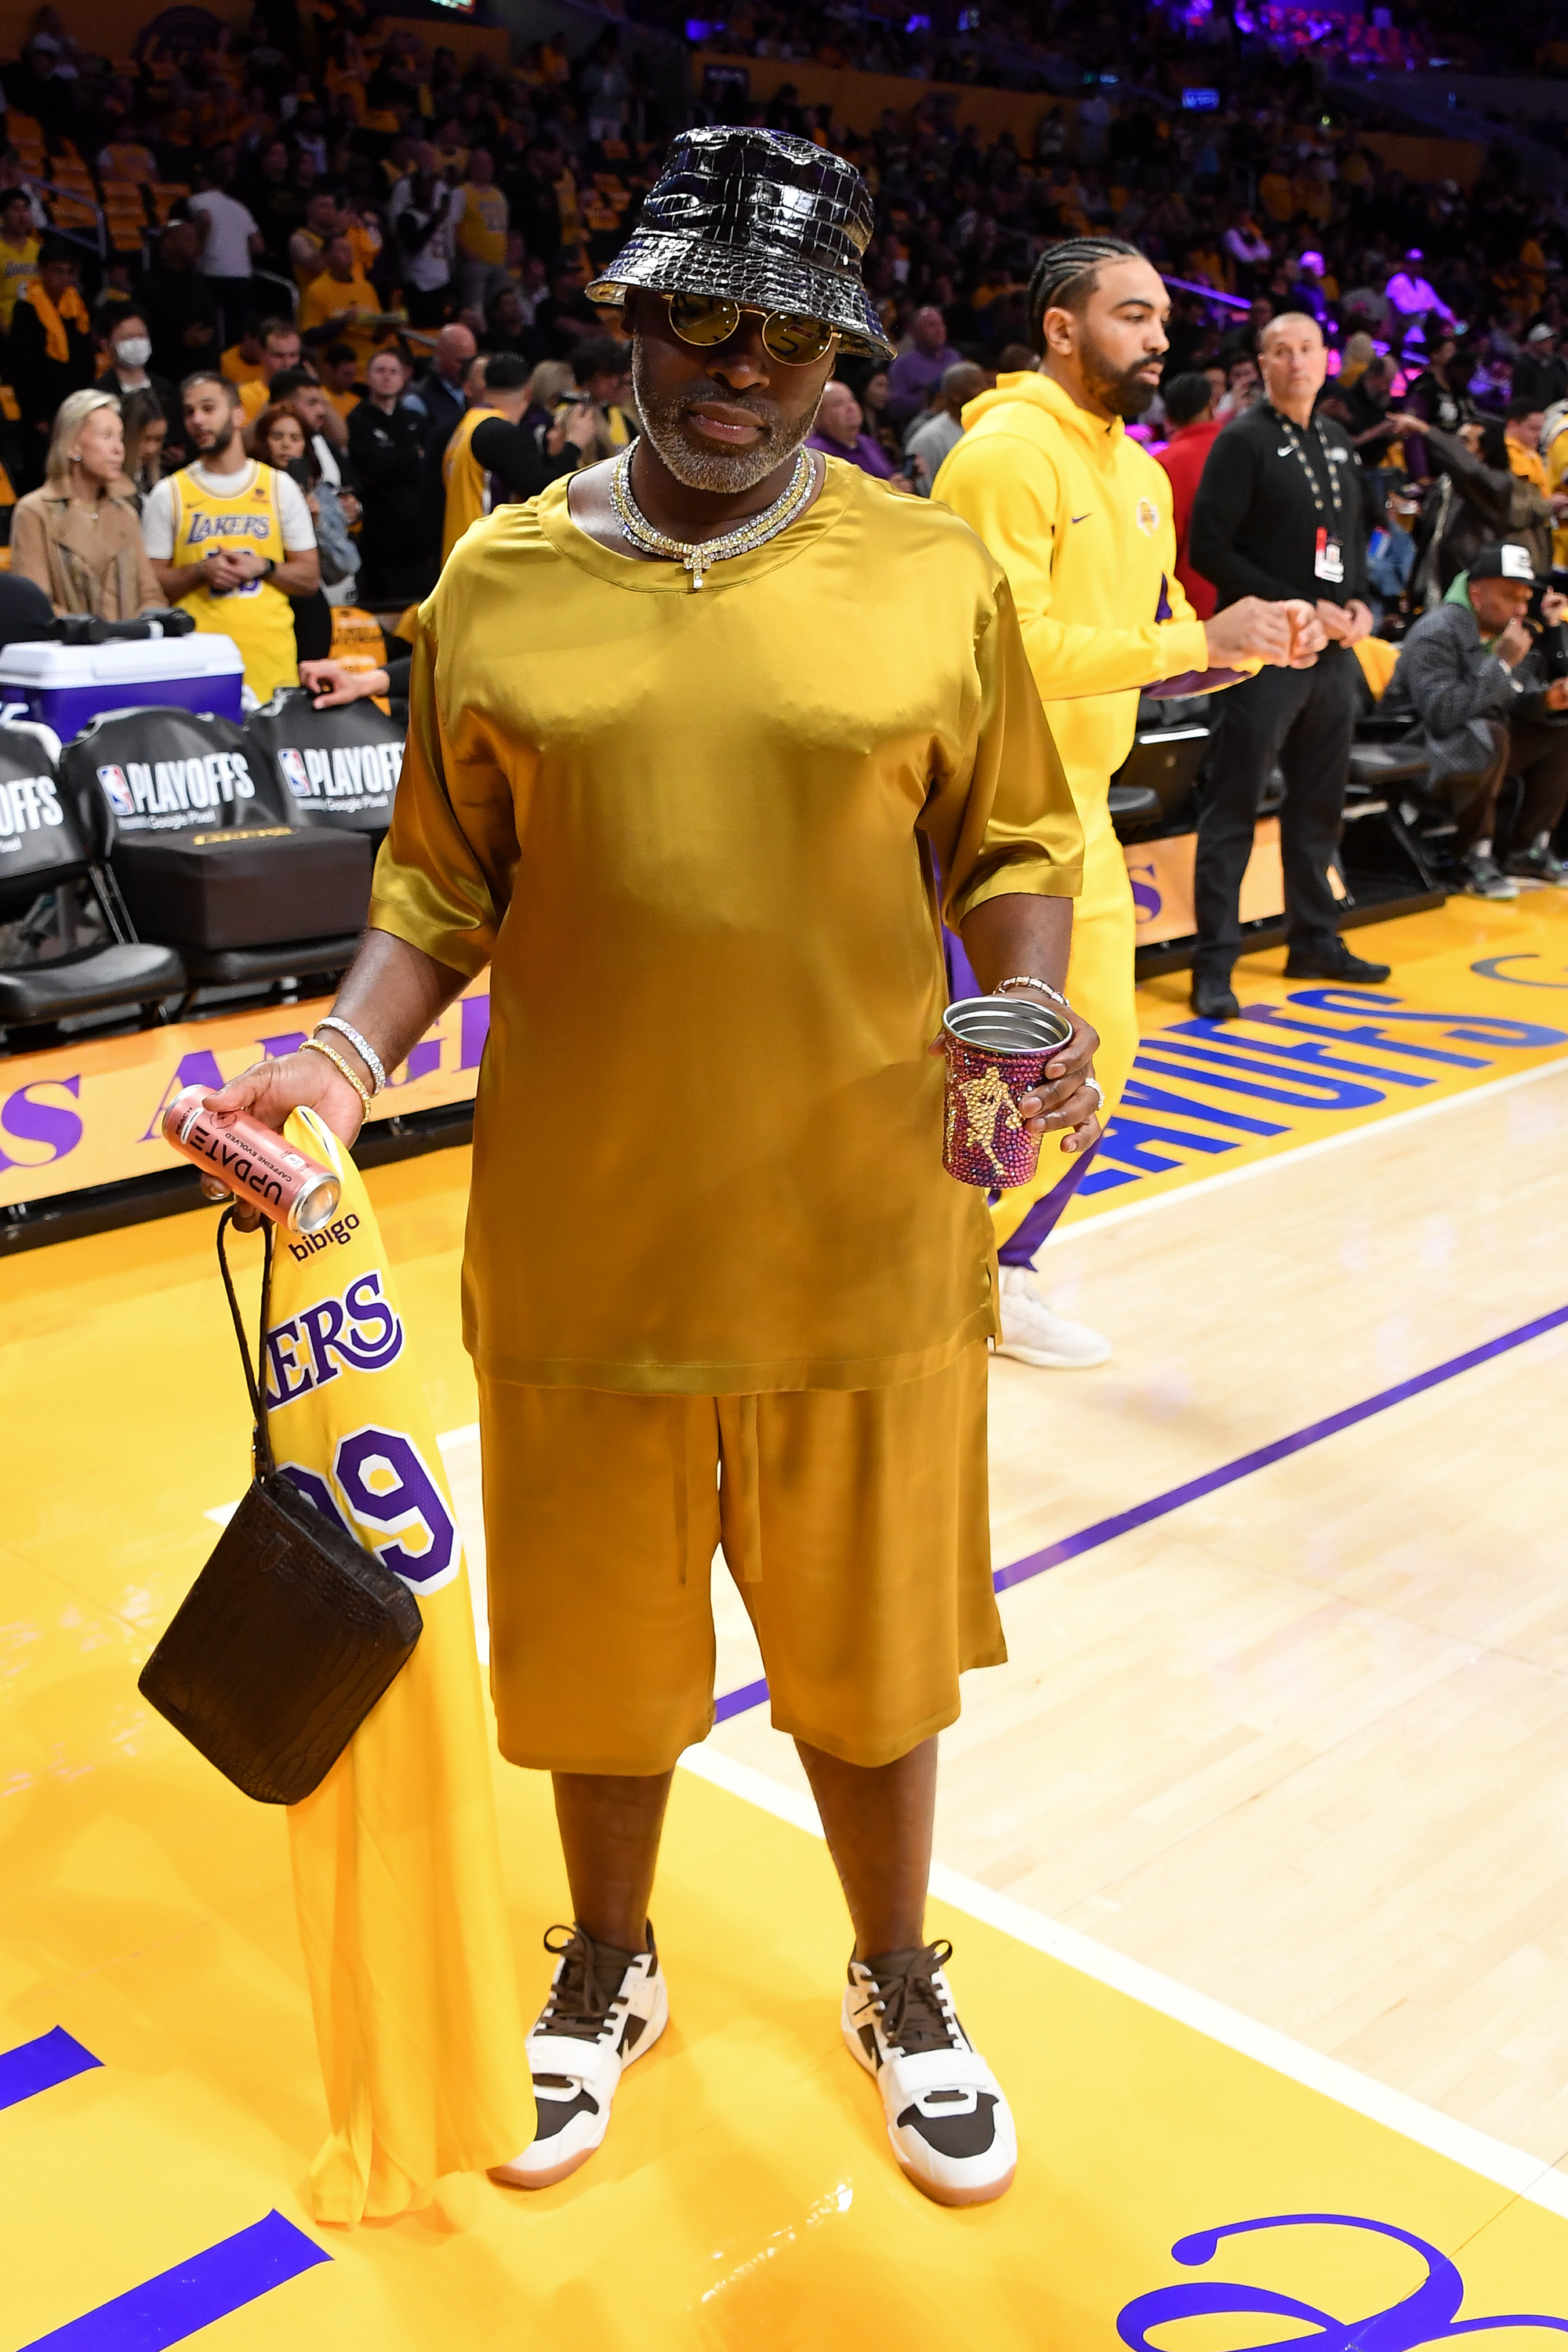 Recently, Corey has shocked fans with his wild look at a Los Angeles Lakers game